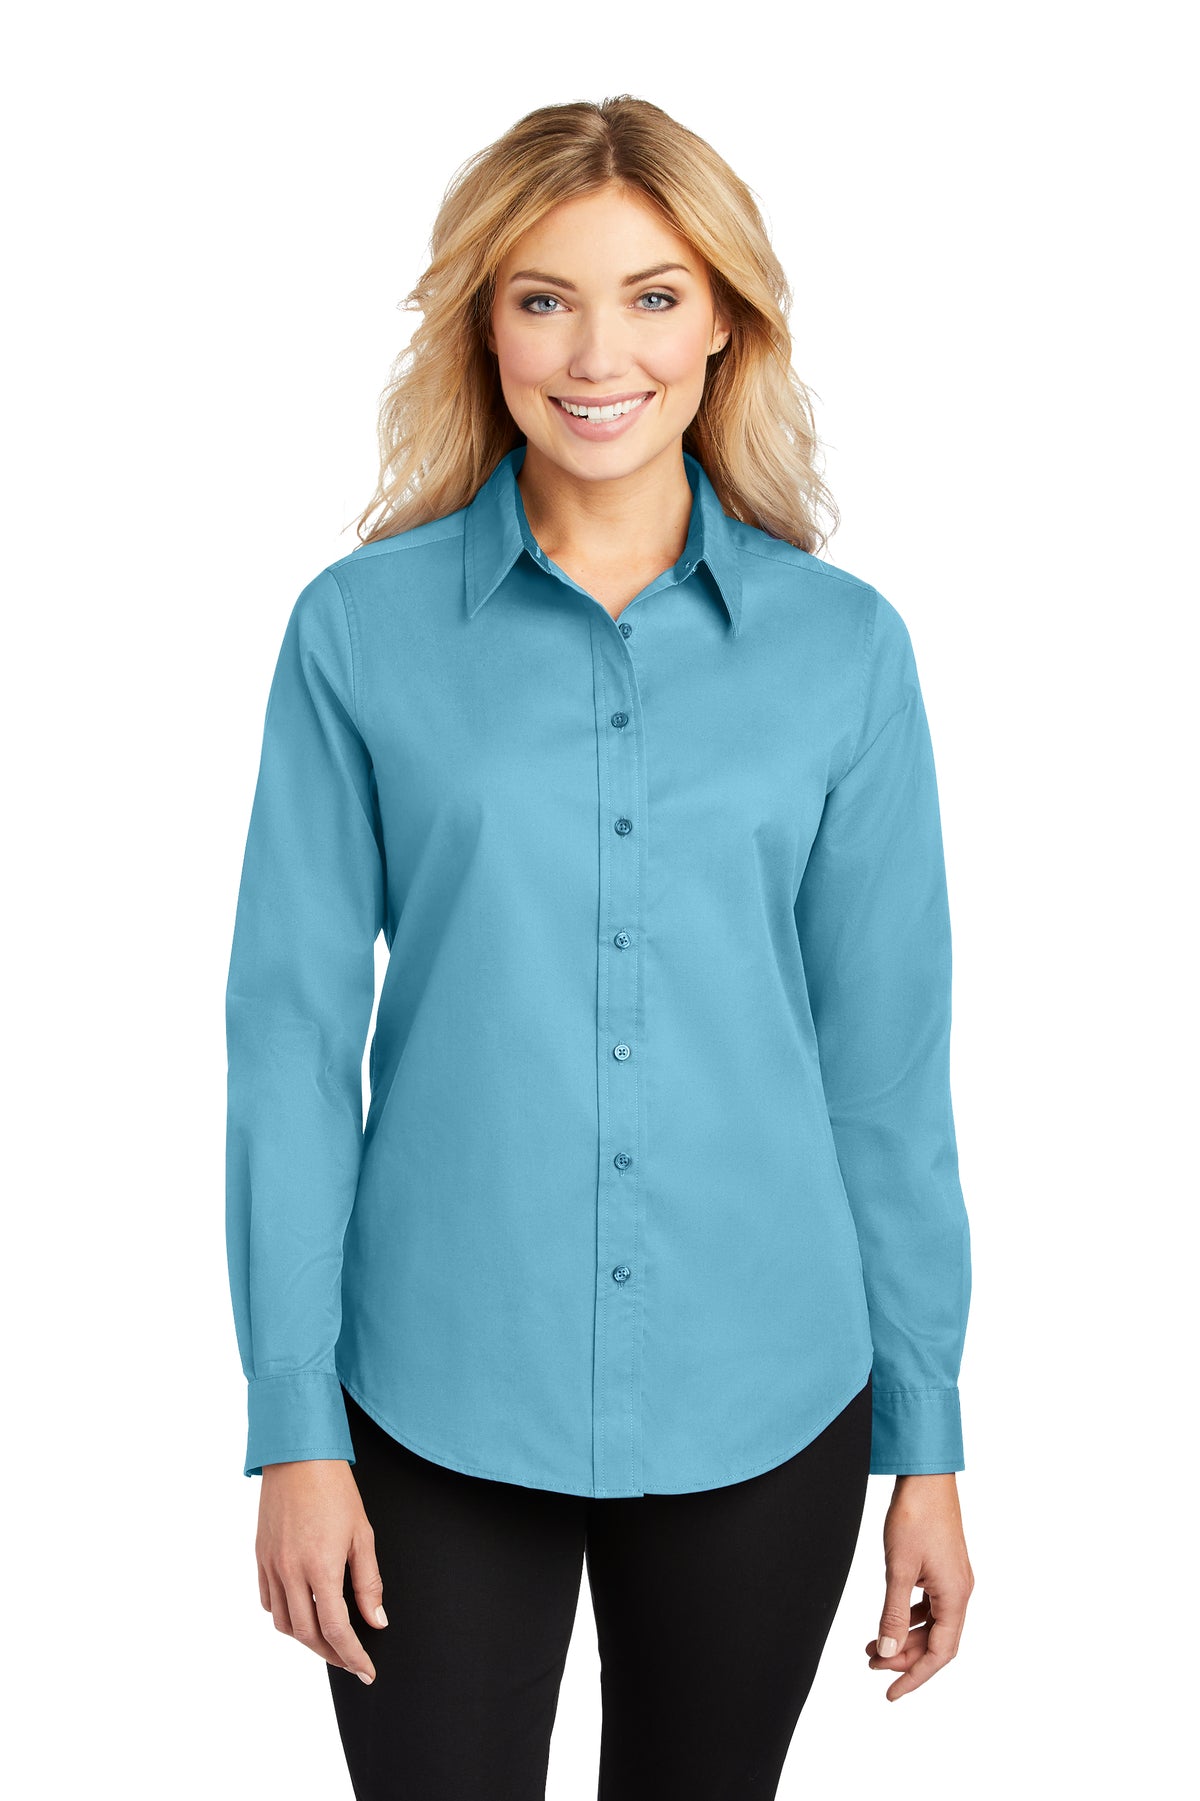 L608-2  Port Authority® Ladies Long Sleeve Easy Care Shirt